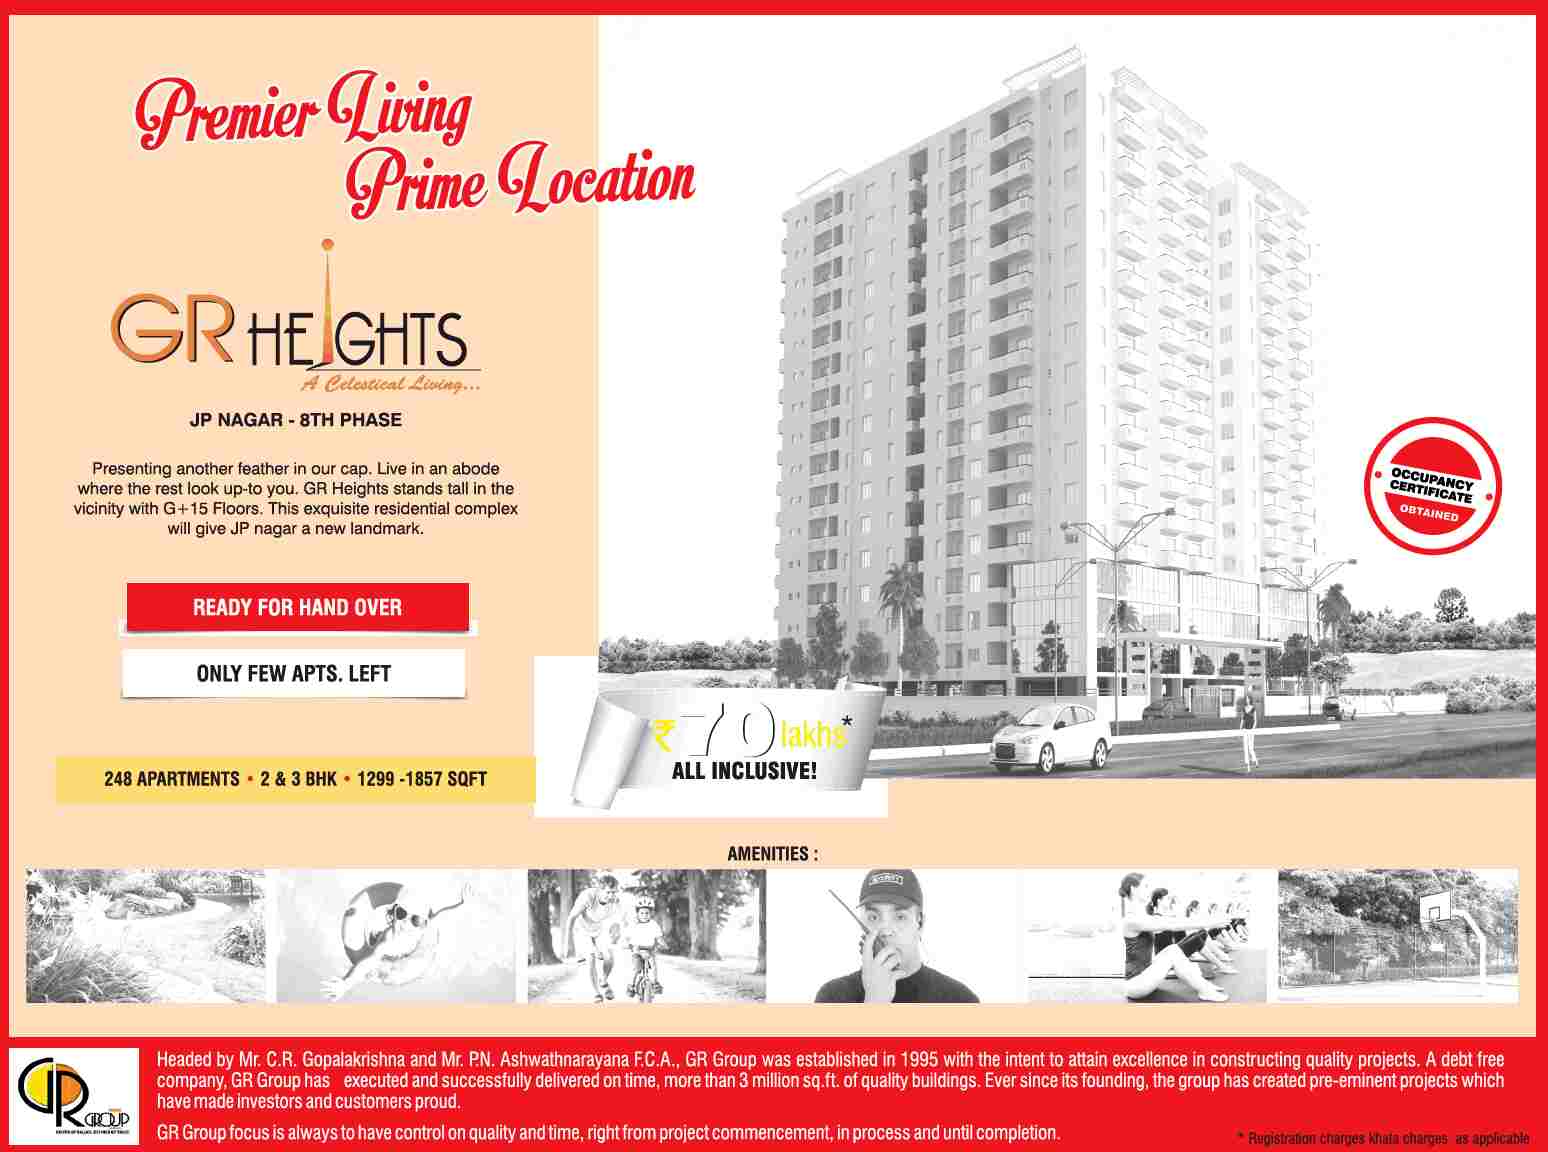 Experience premier living with prime location at GR Heights in Bangalore